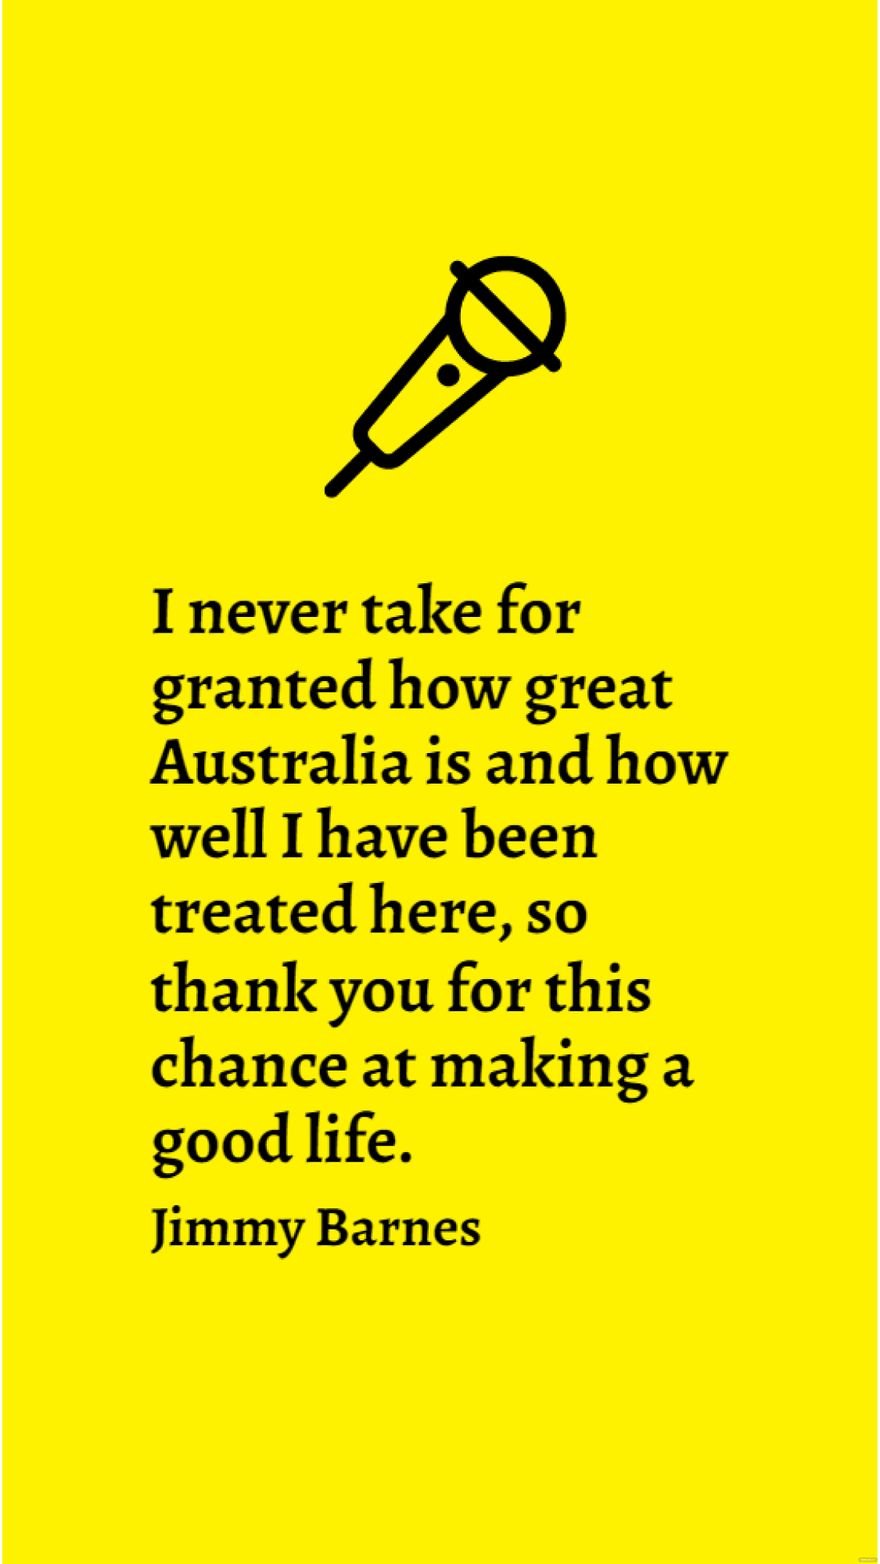 Jimmy Barnes - I never take for granted how great Australia is and how well I have been treated here, so thank you for this chance at making a good life.